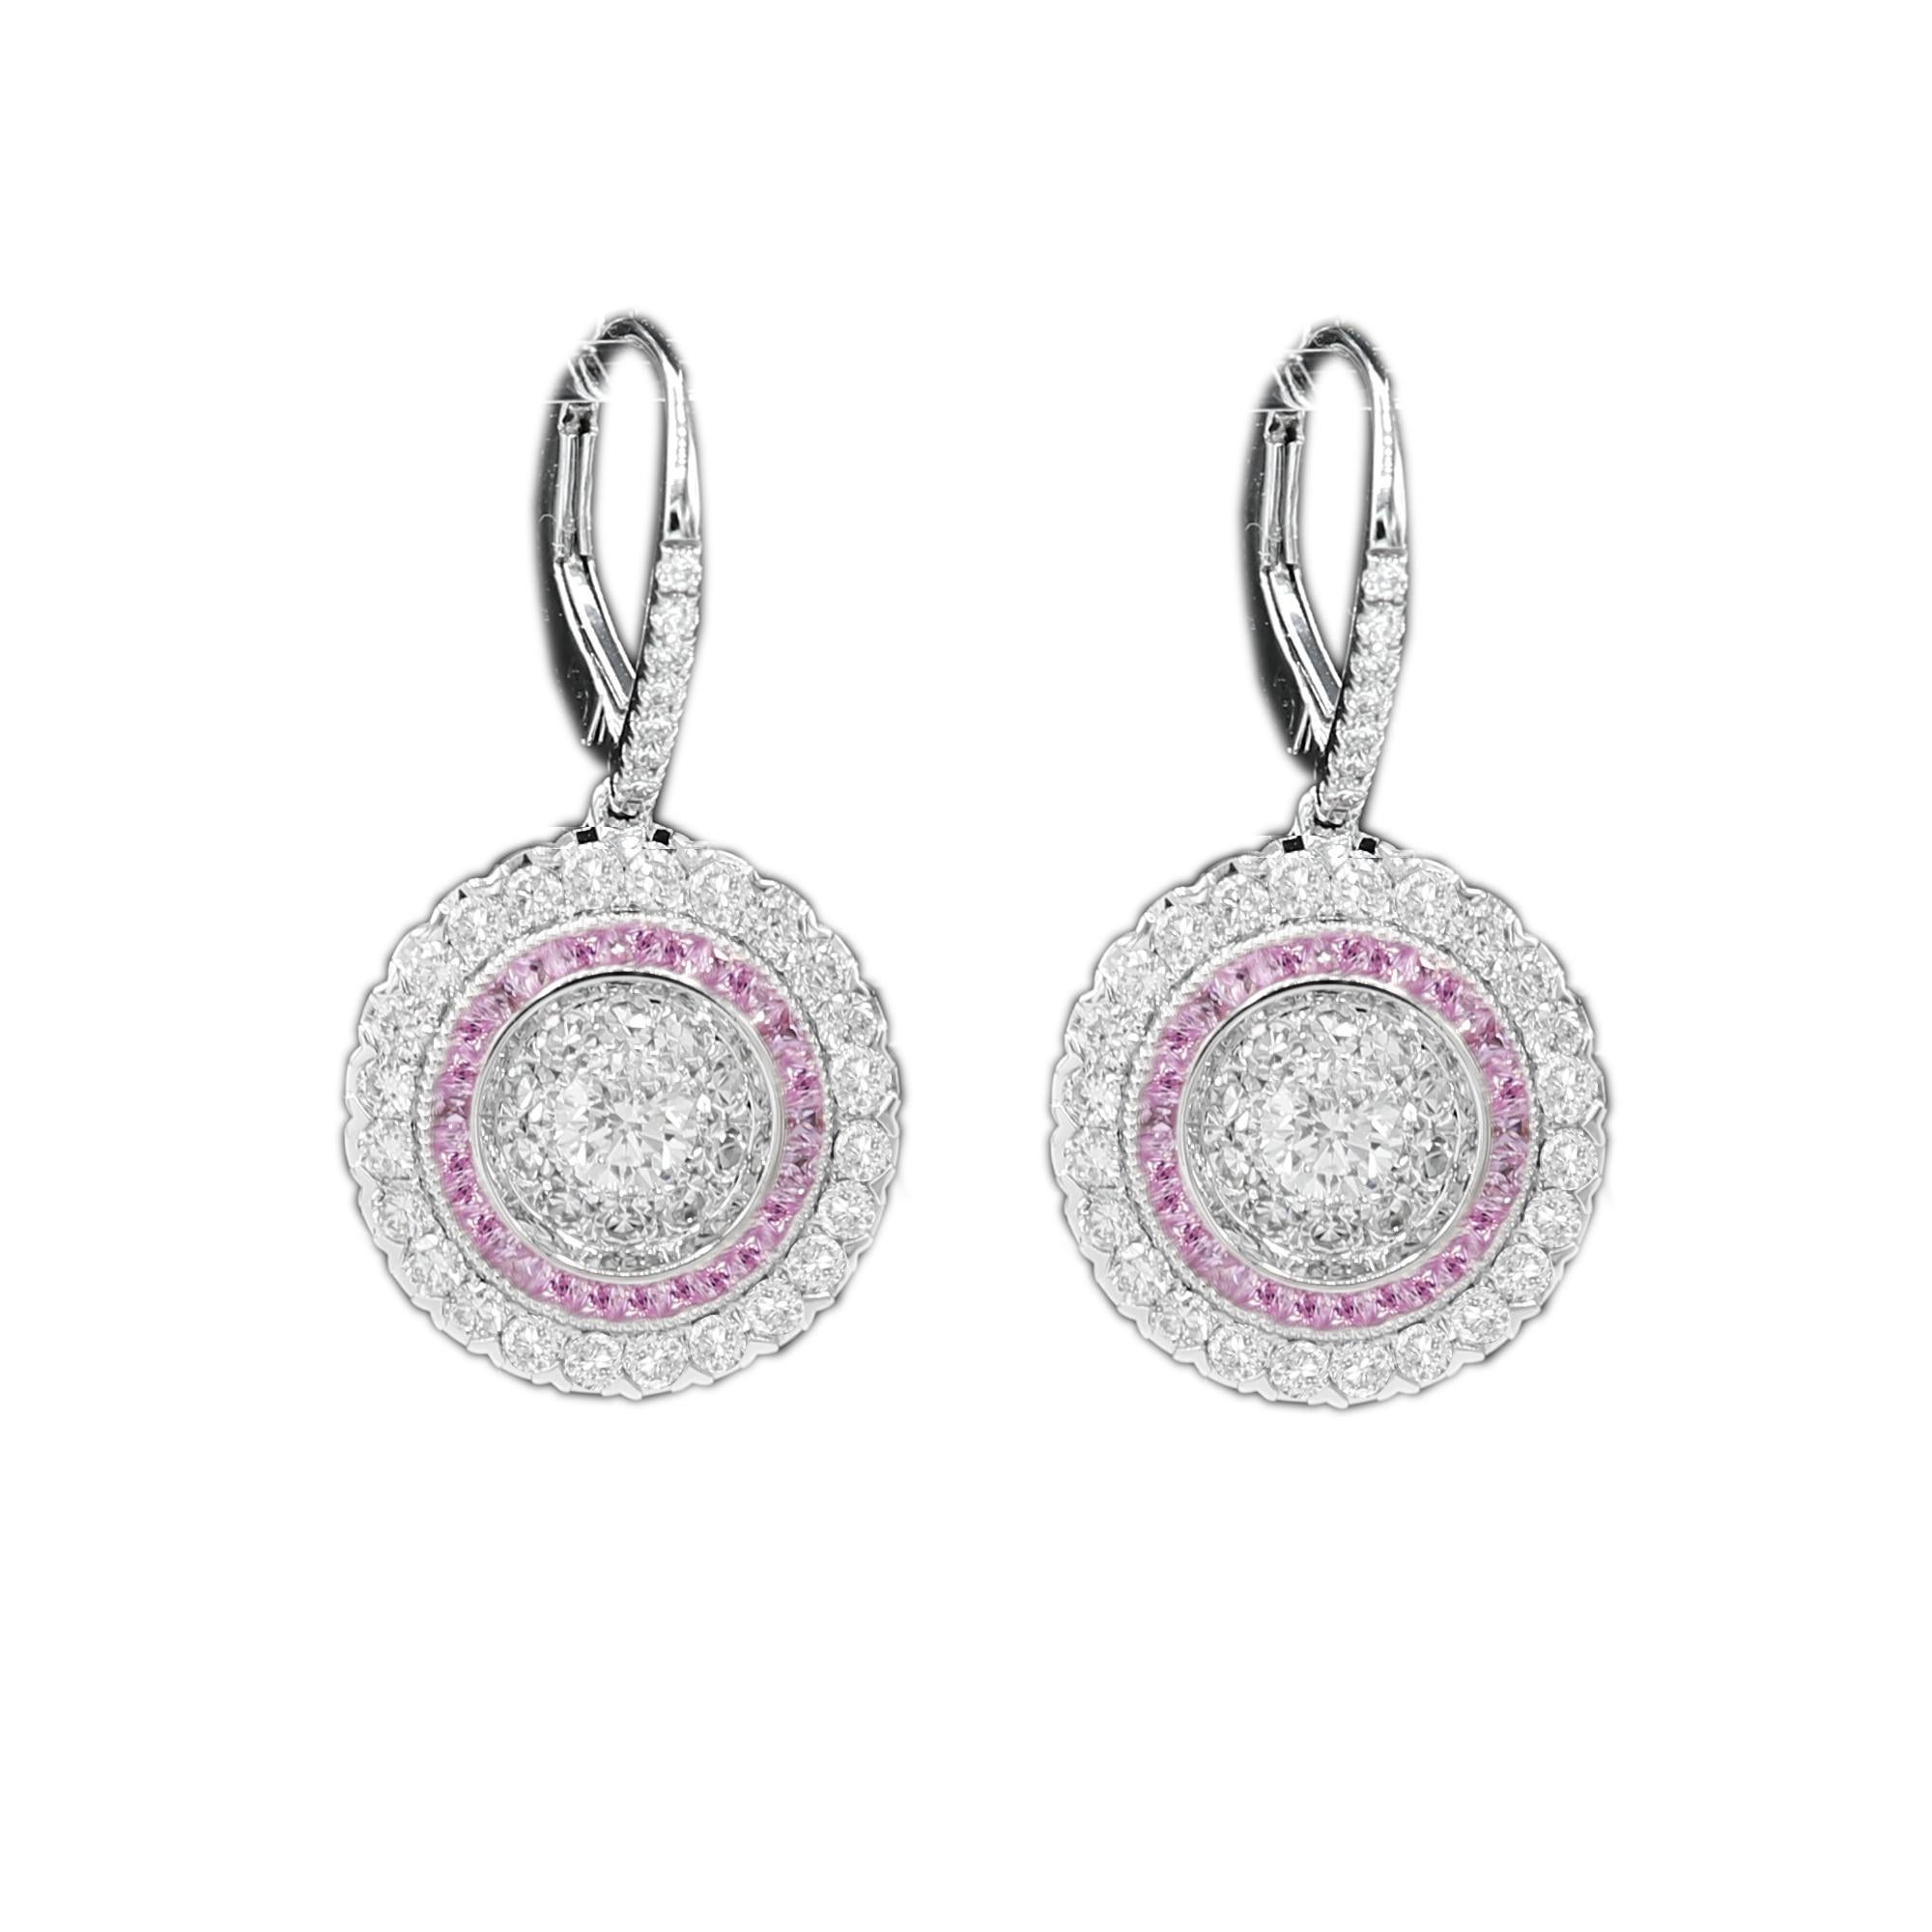 Art Deco Style Earring 18 Karat White Gold Diamonds and Pink Sapphire Earrings In New Condition For Sale In Brooklyn, NY